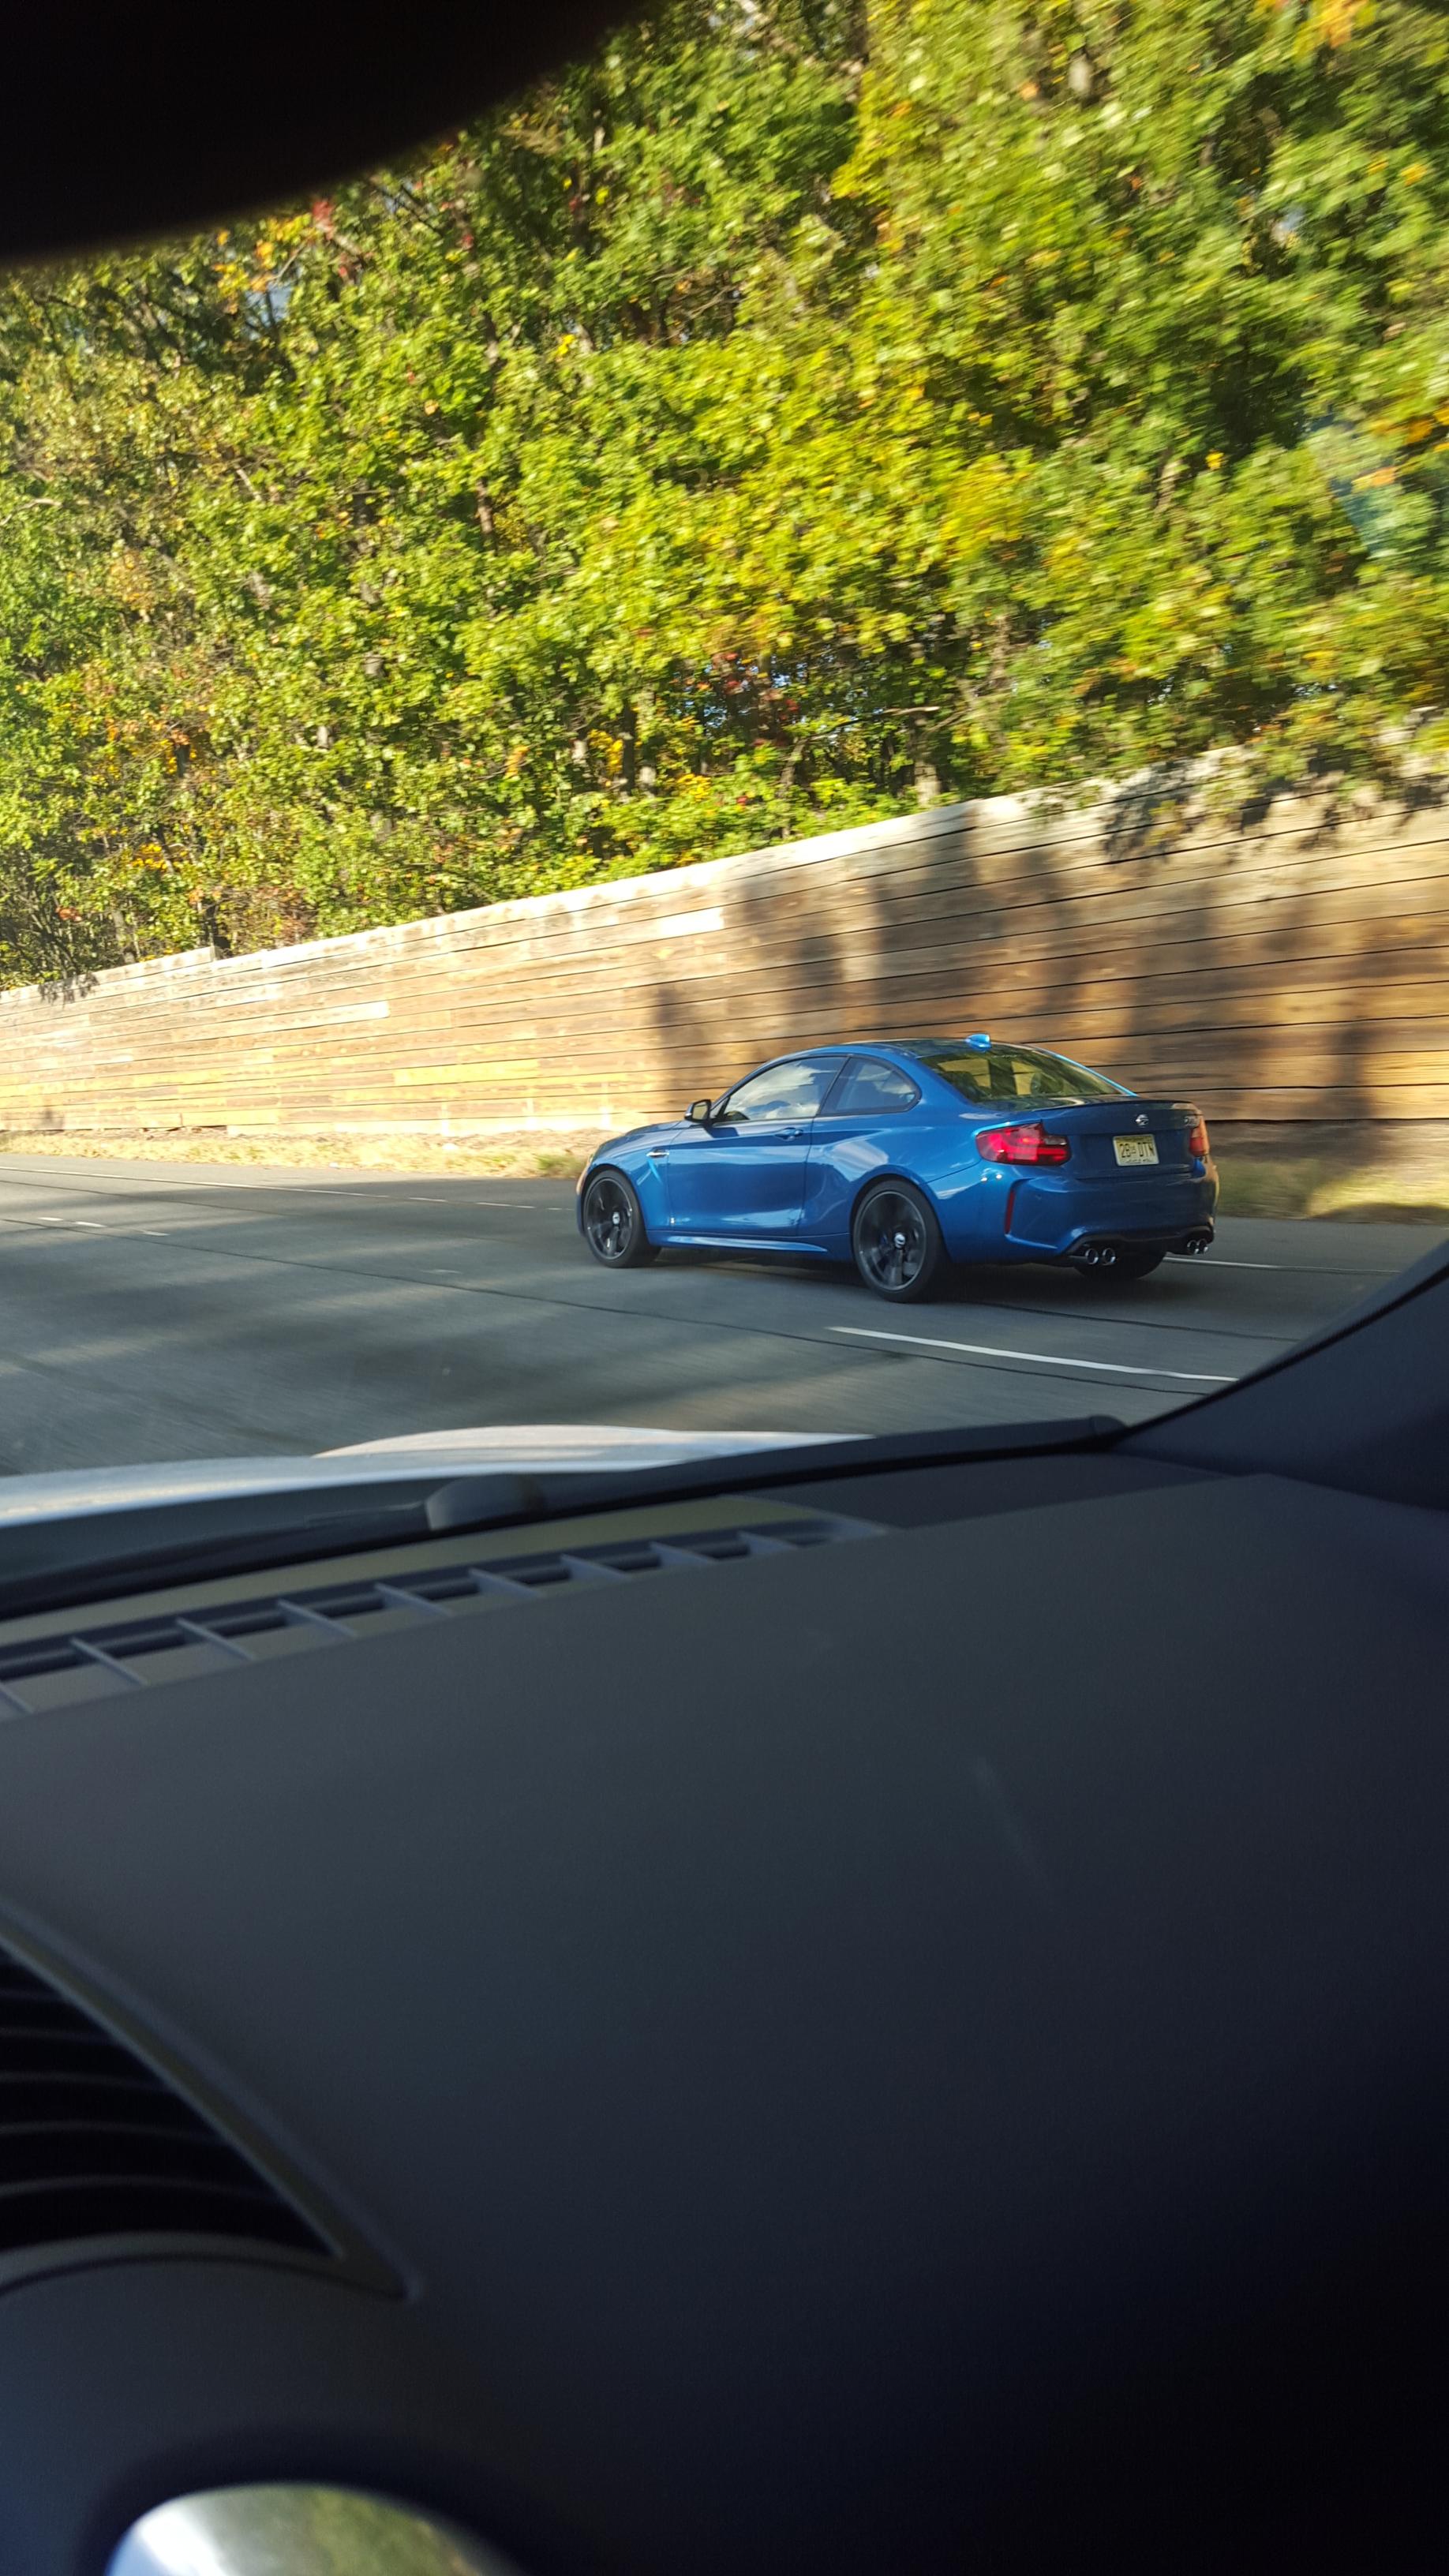 bmw-m2-spotted-on-the-road-in-the-us-100